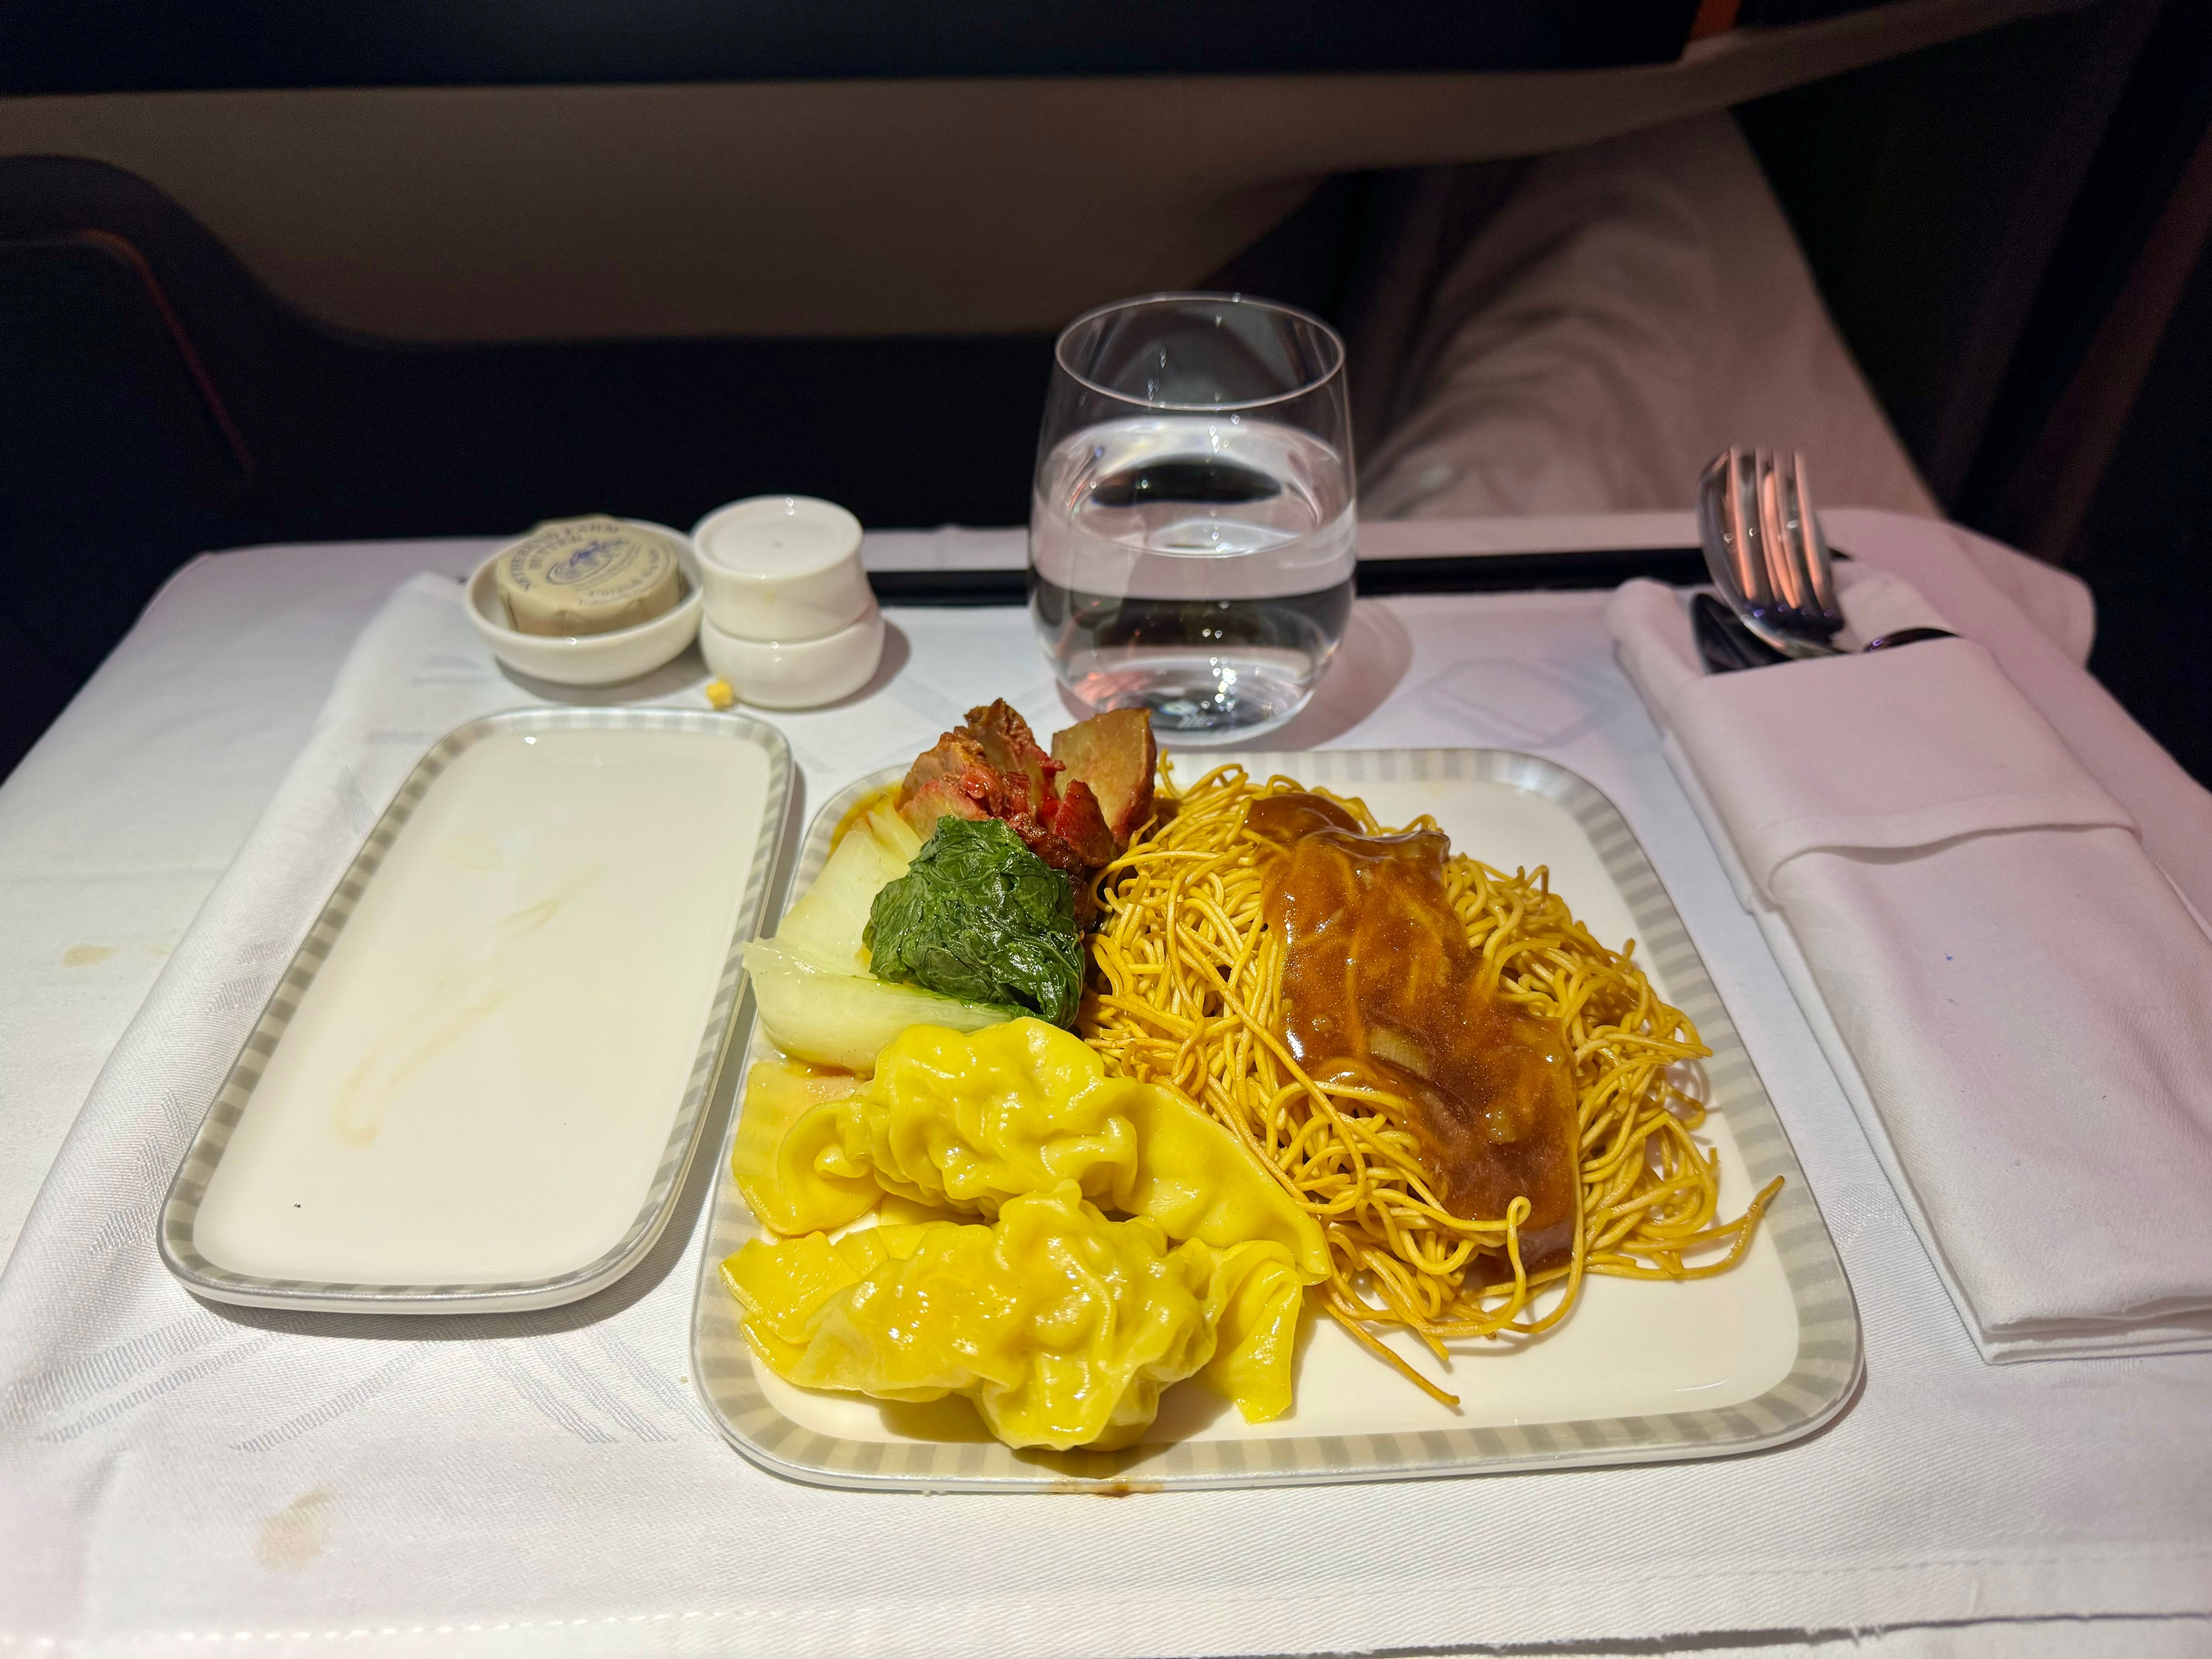 Singapore Airlines Airbus A380 Lunch service